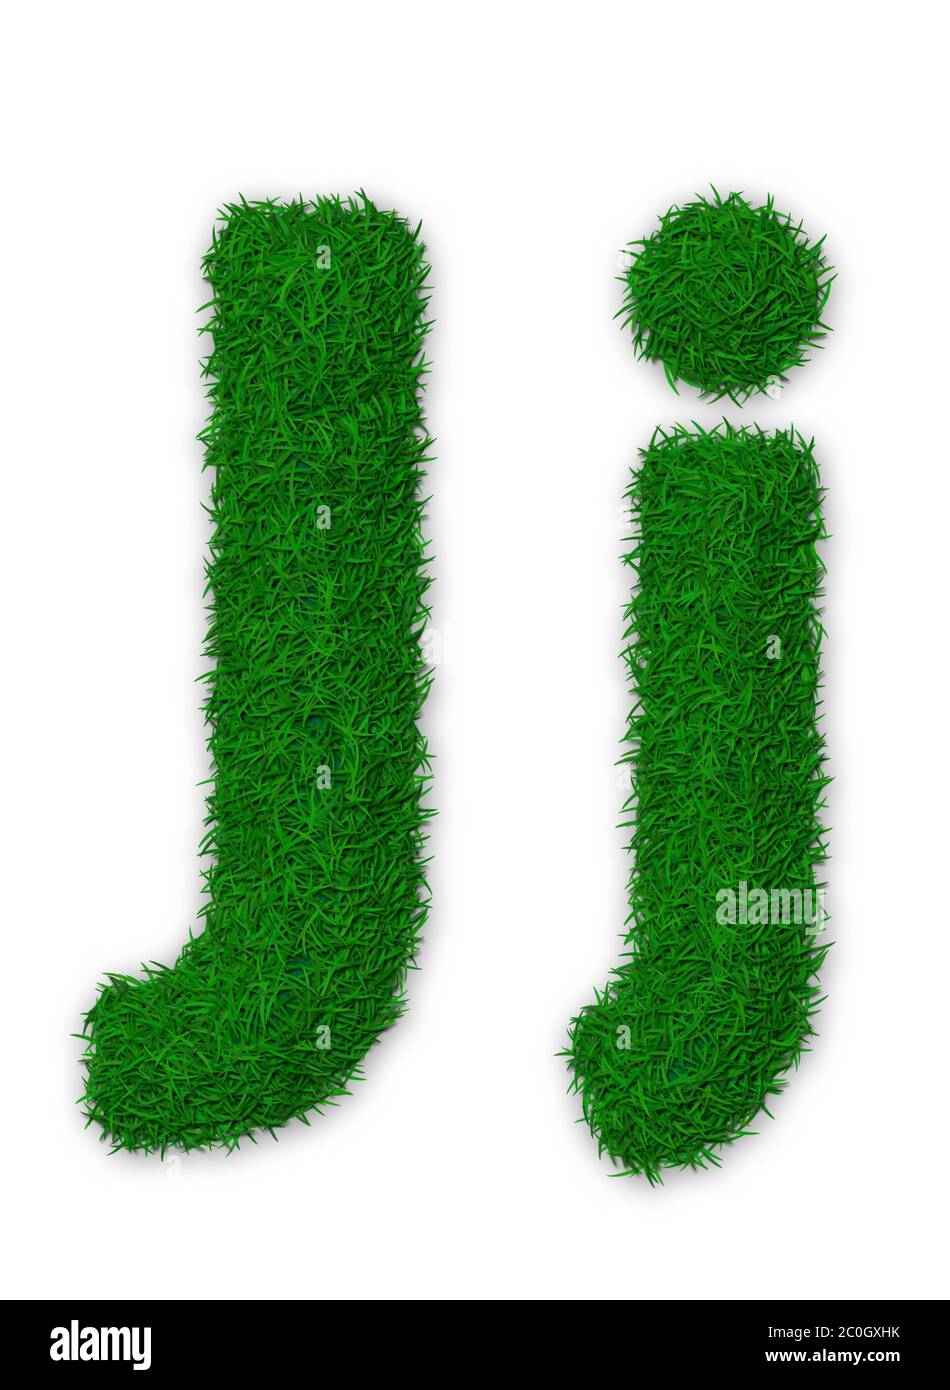 Illustration of capital and lowercase letter J made of grass Stock ...